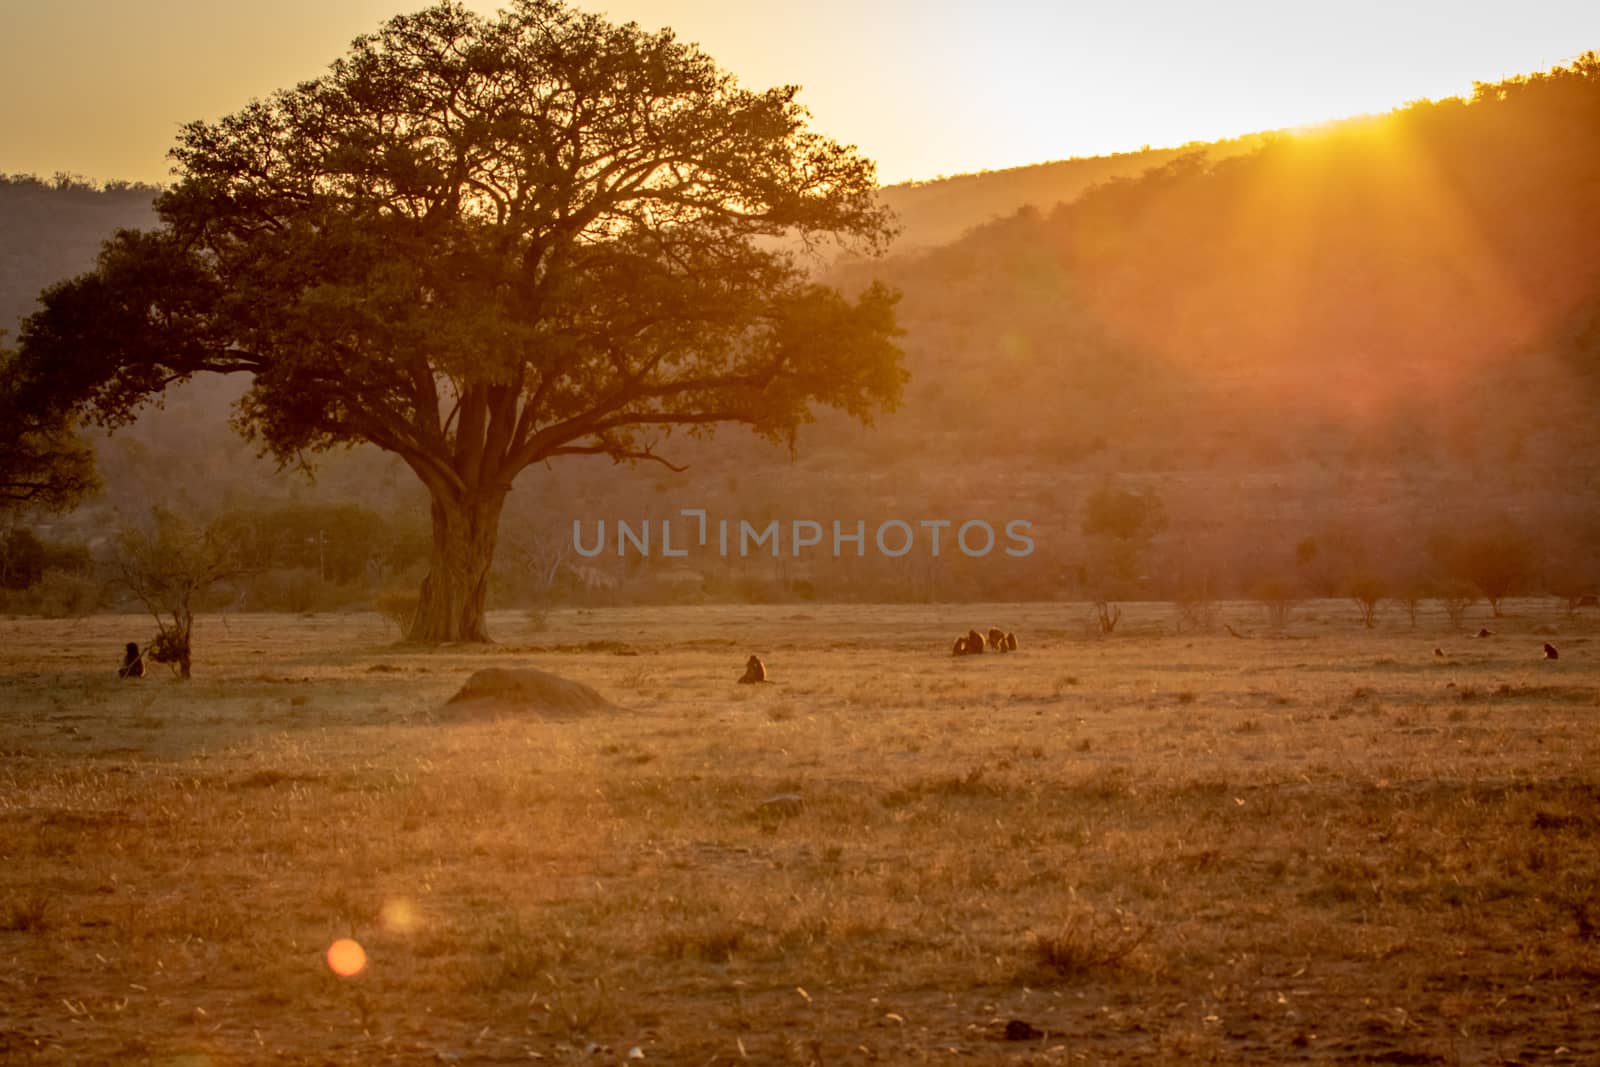 Sunset on a open plain with Chacma baboons. by Simoneemanphotography